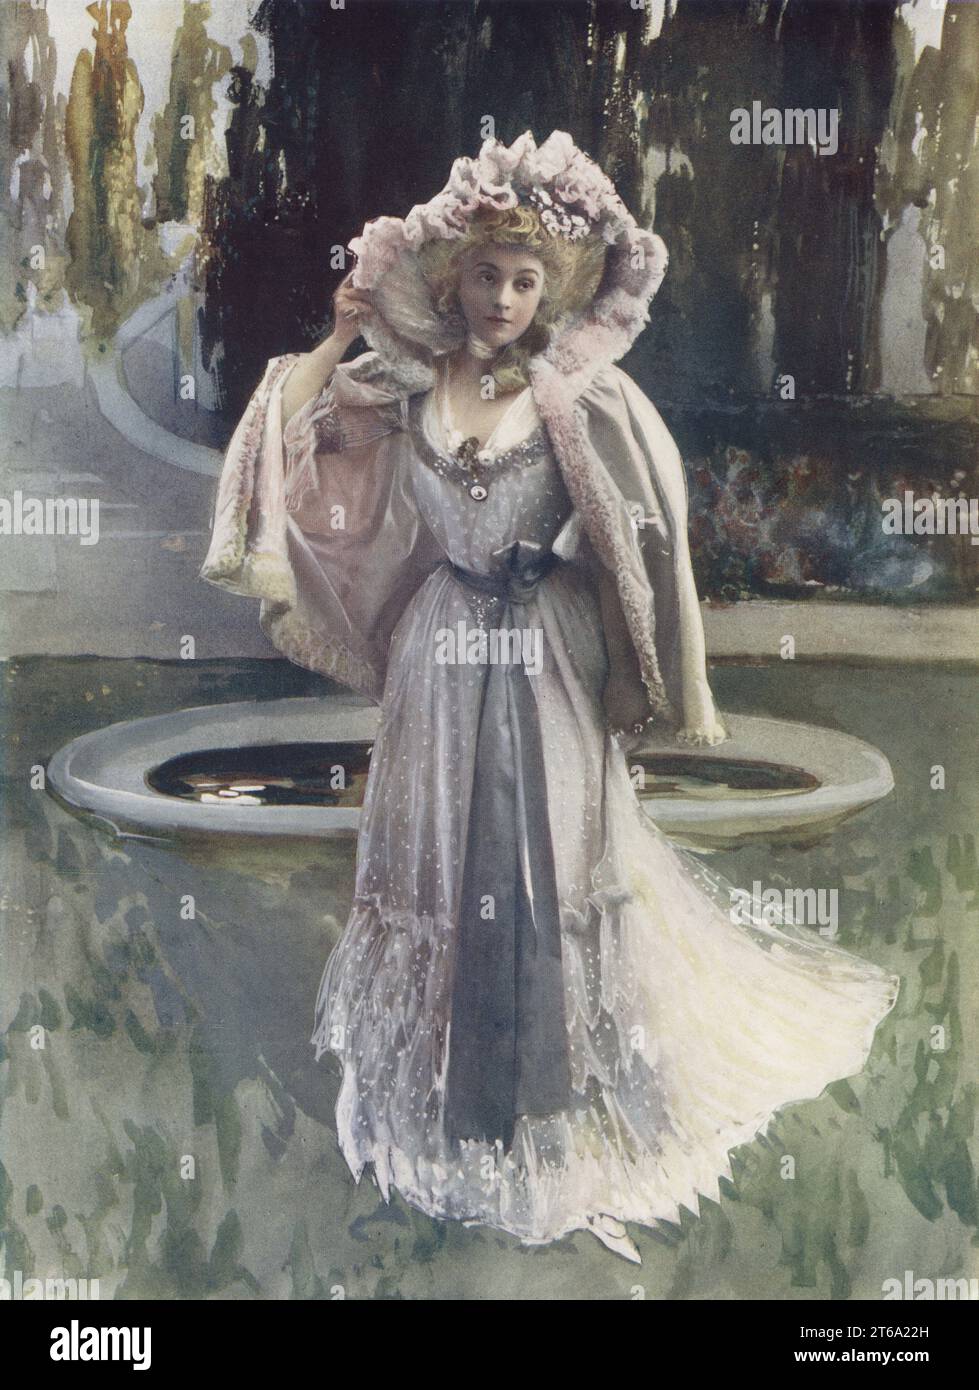 Mme. Gabrielle Rejane in Sylvie, ou la Curieuse d'amour, a stage play by Abel Hermant, music by Edmond Laurens, 1900. Gabrielle Charlotte Reju, French stage and film actress, 1856-1920. Photo by Leopold Emile Reutlinger. Colour printing of a hand-coloured illustration based on a monochrome photograph from George Newness Players of the Day, London, 1905. Stock Photo